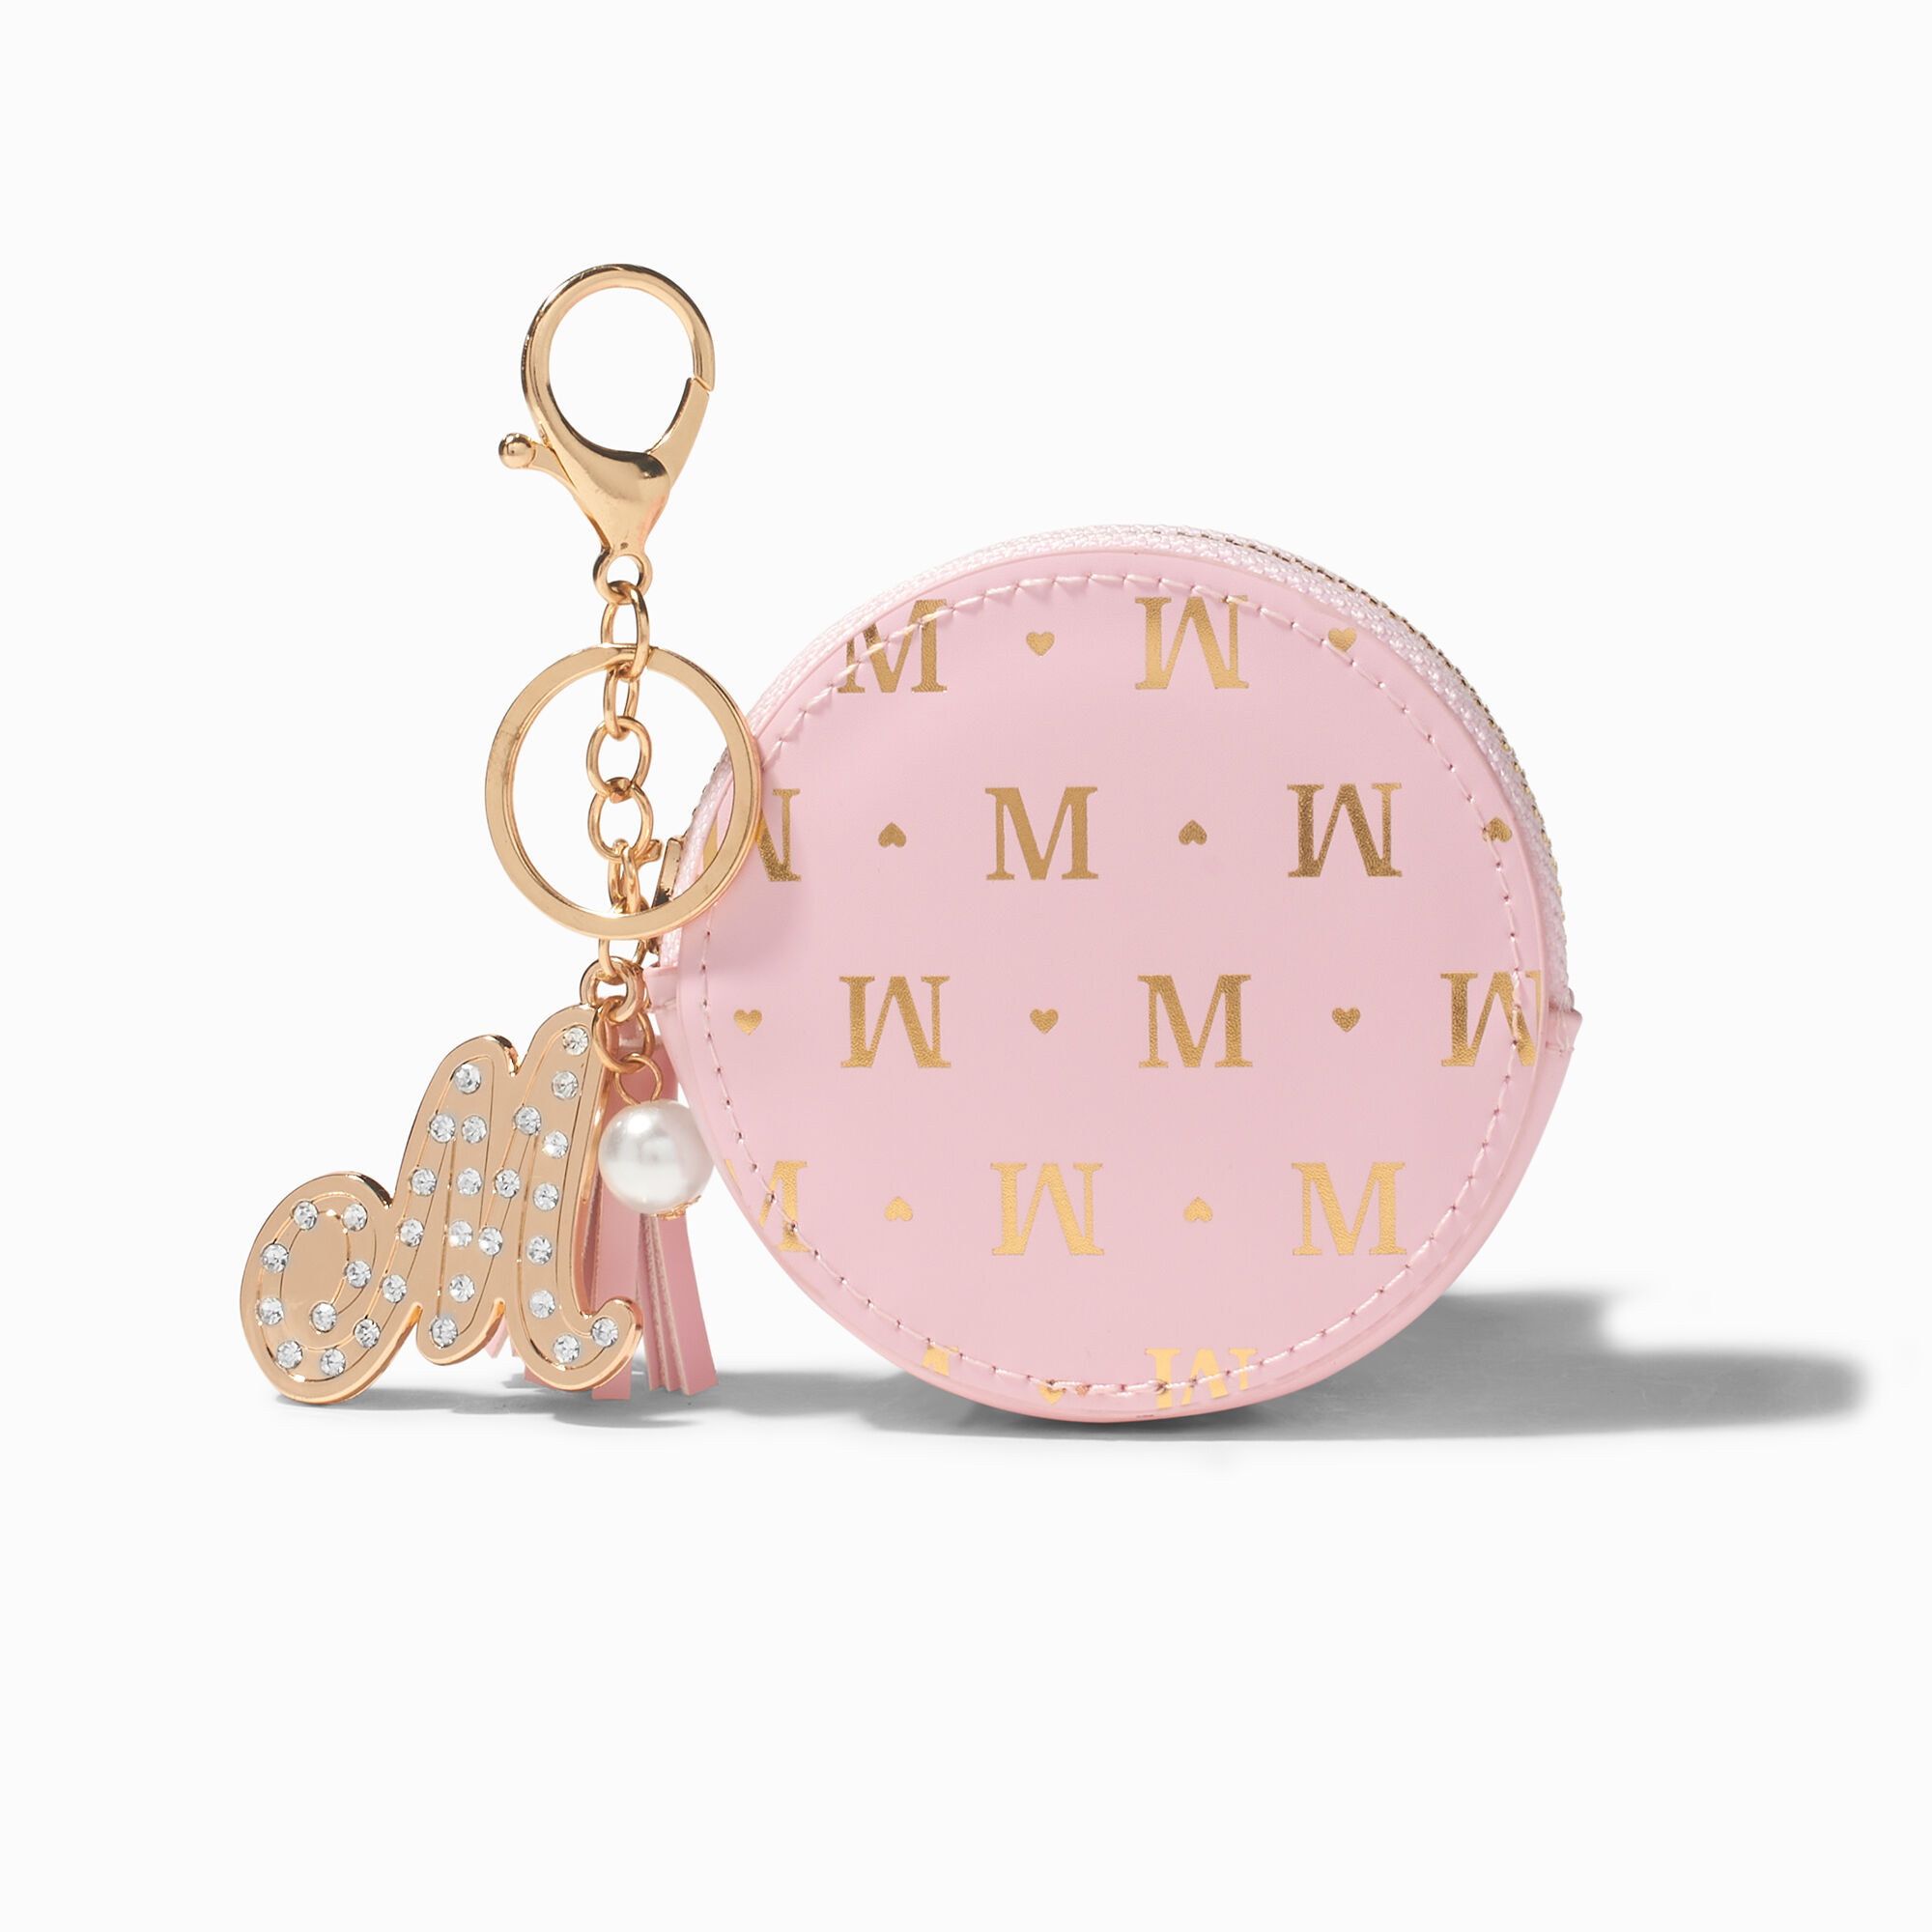 View Claires en Initial Coin Purse M Gold information